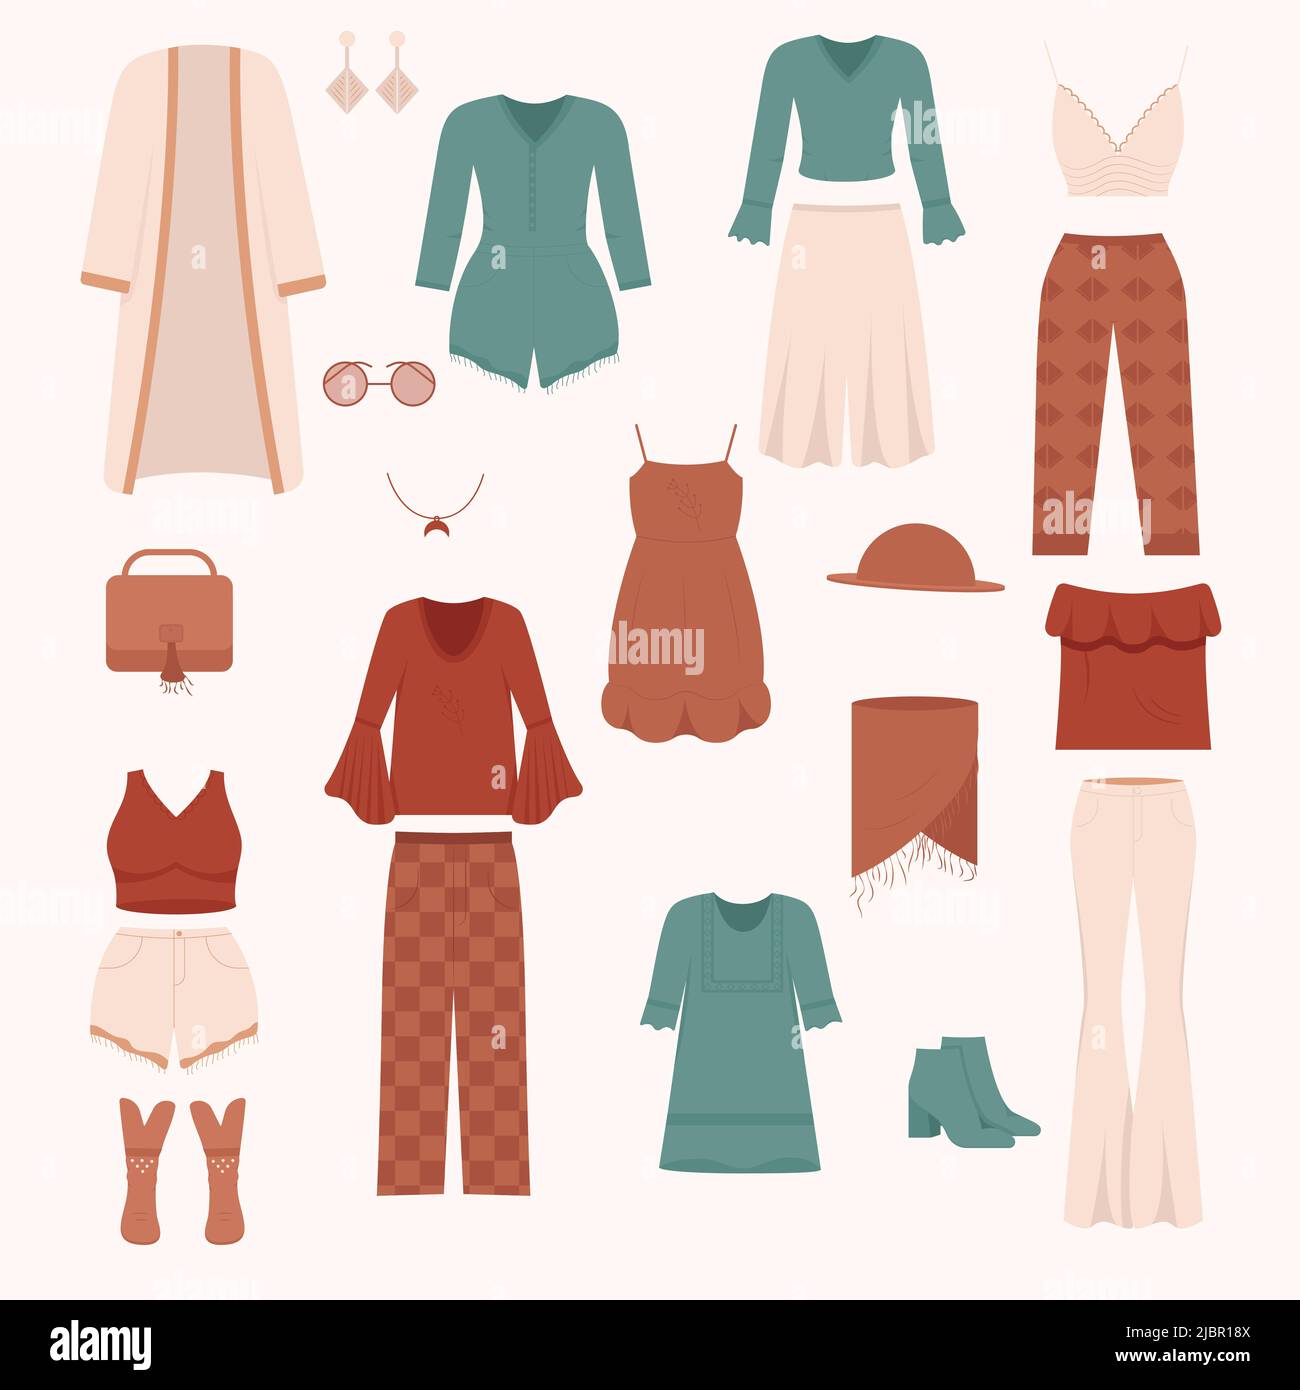 People In Old Fashion Clothing Vector Illustration Set. Cartoon